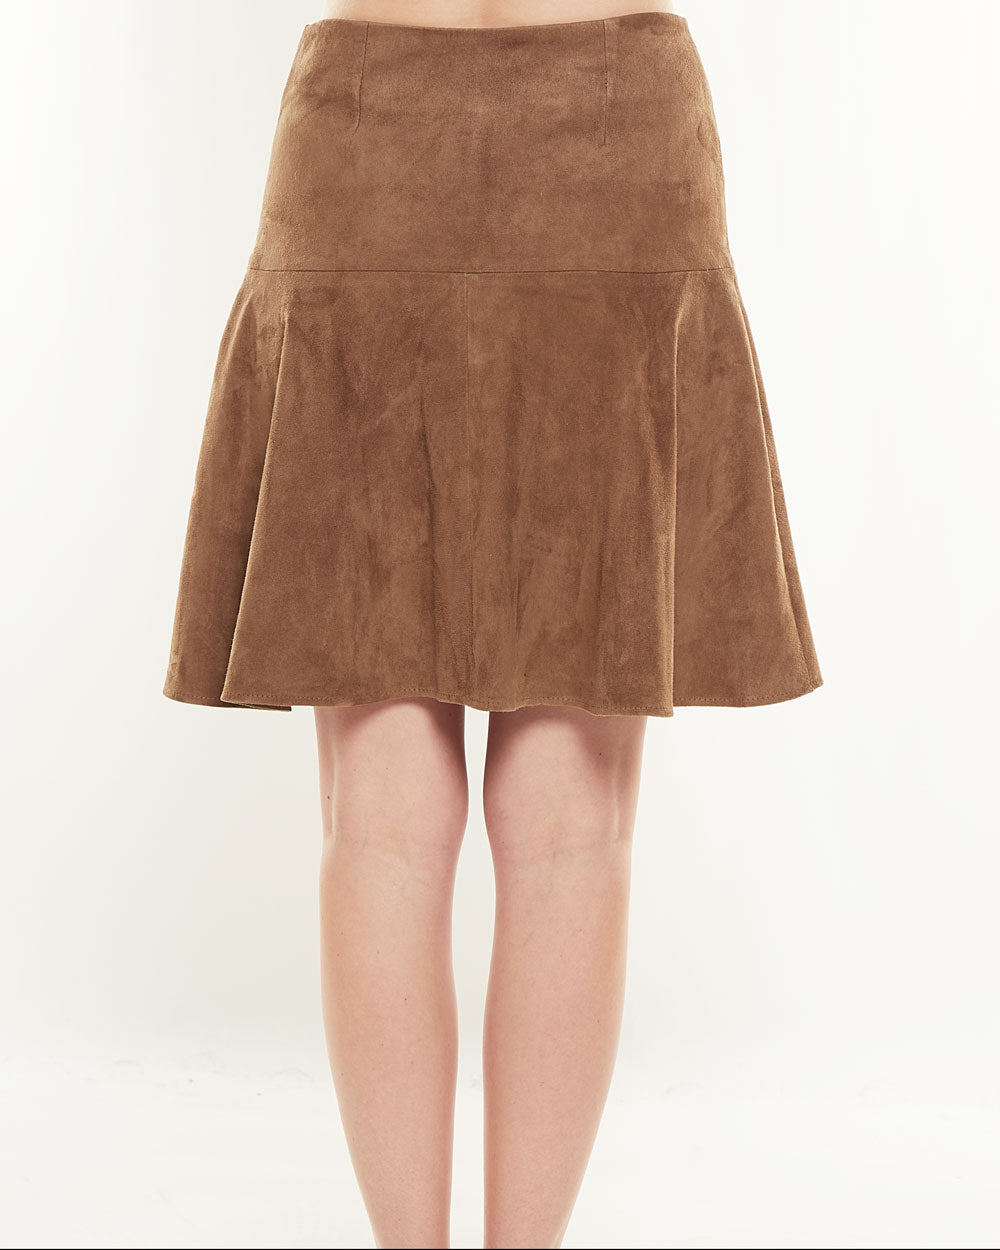 Mocha Suede Fit and Flare Mini Skirt